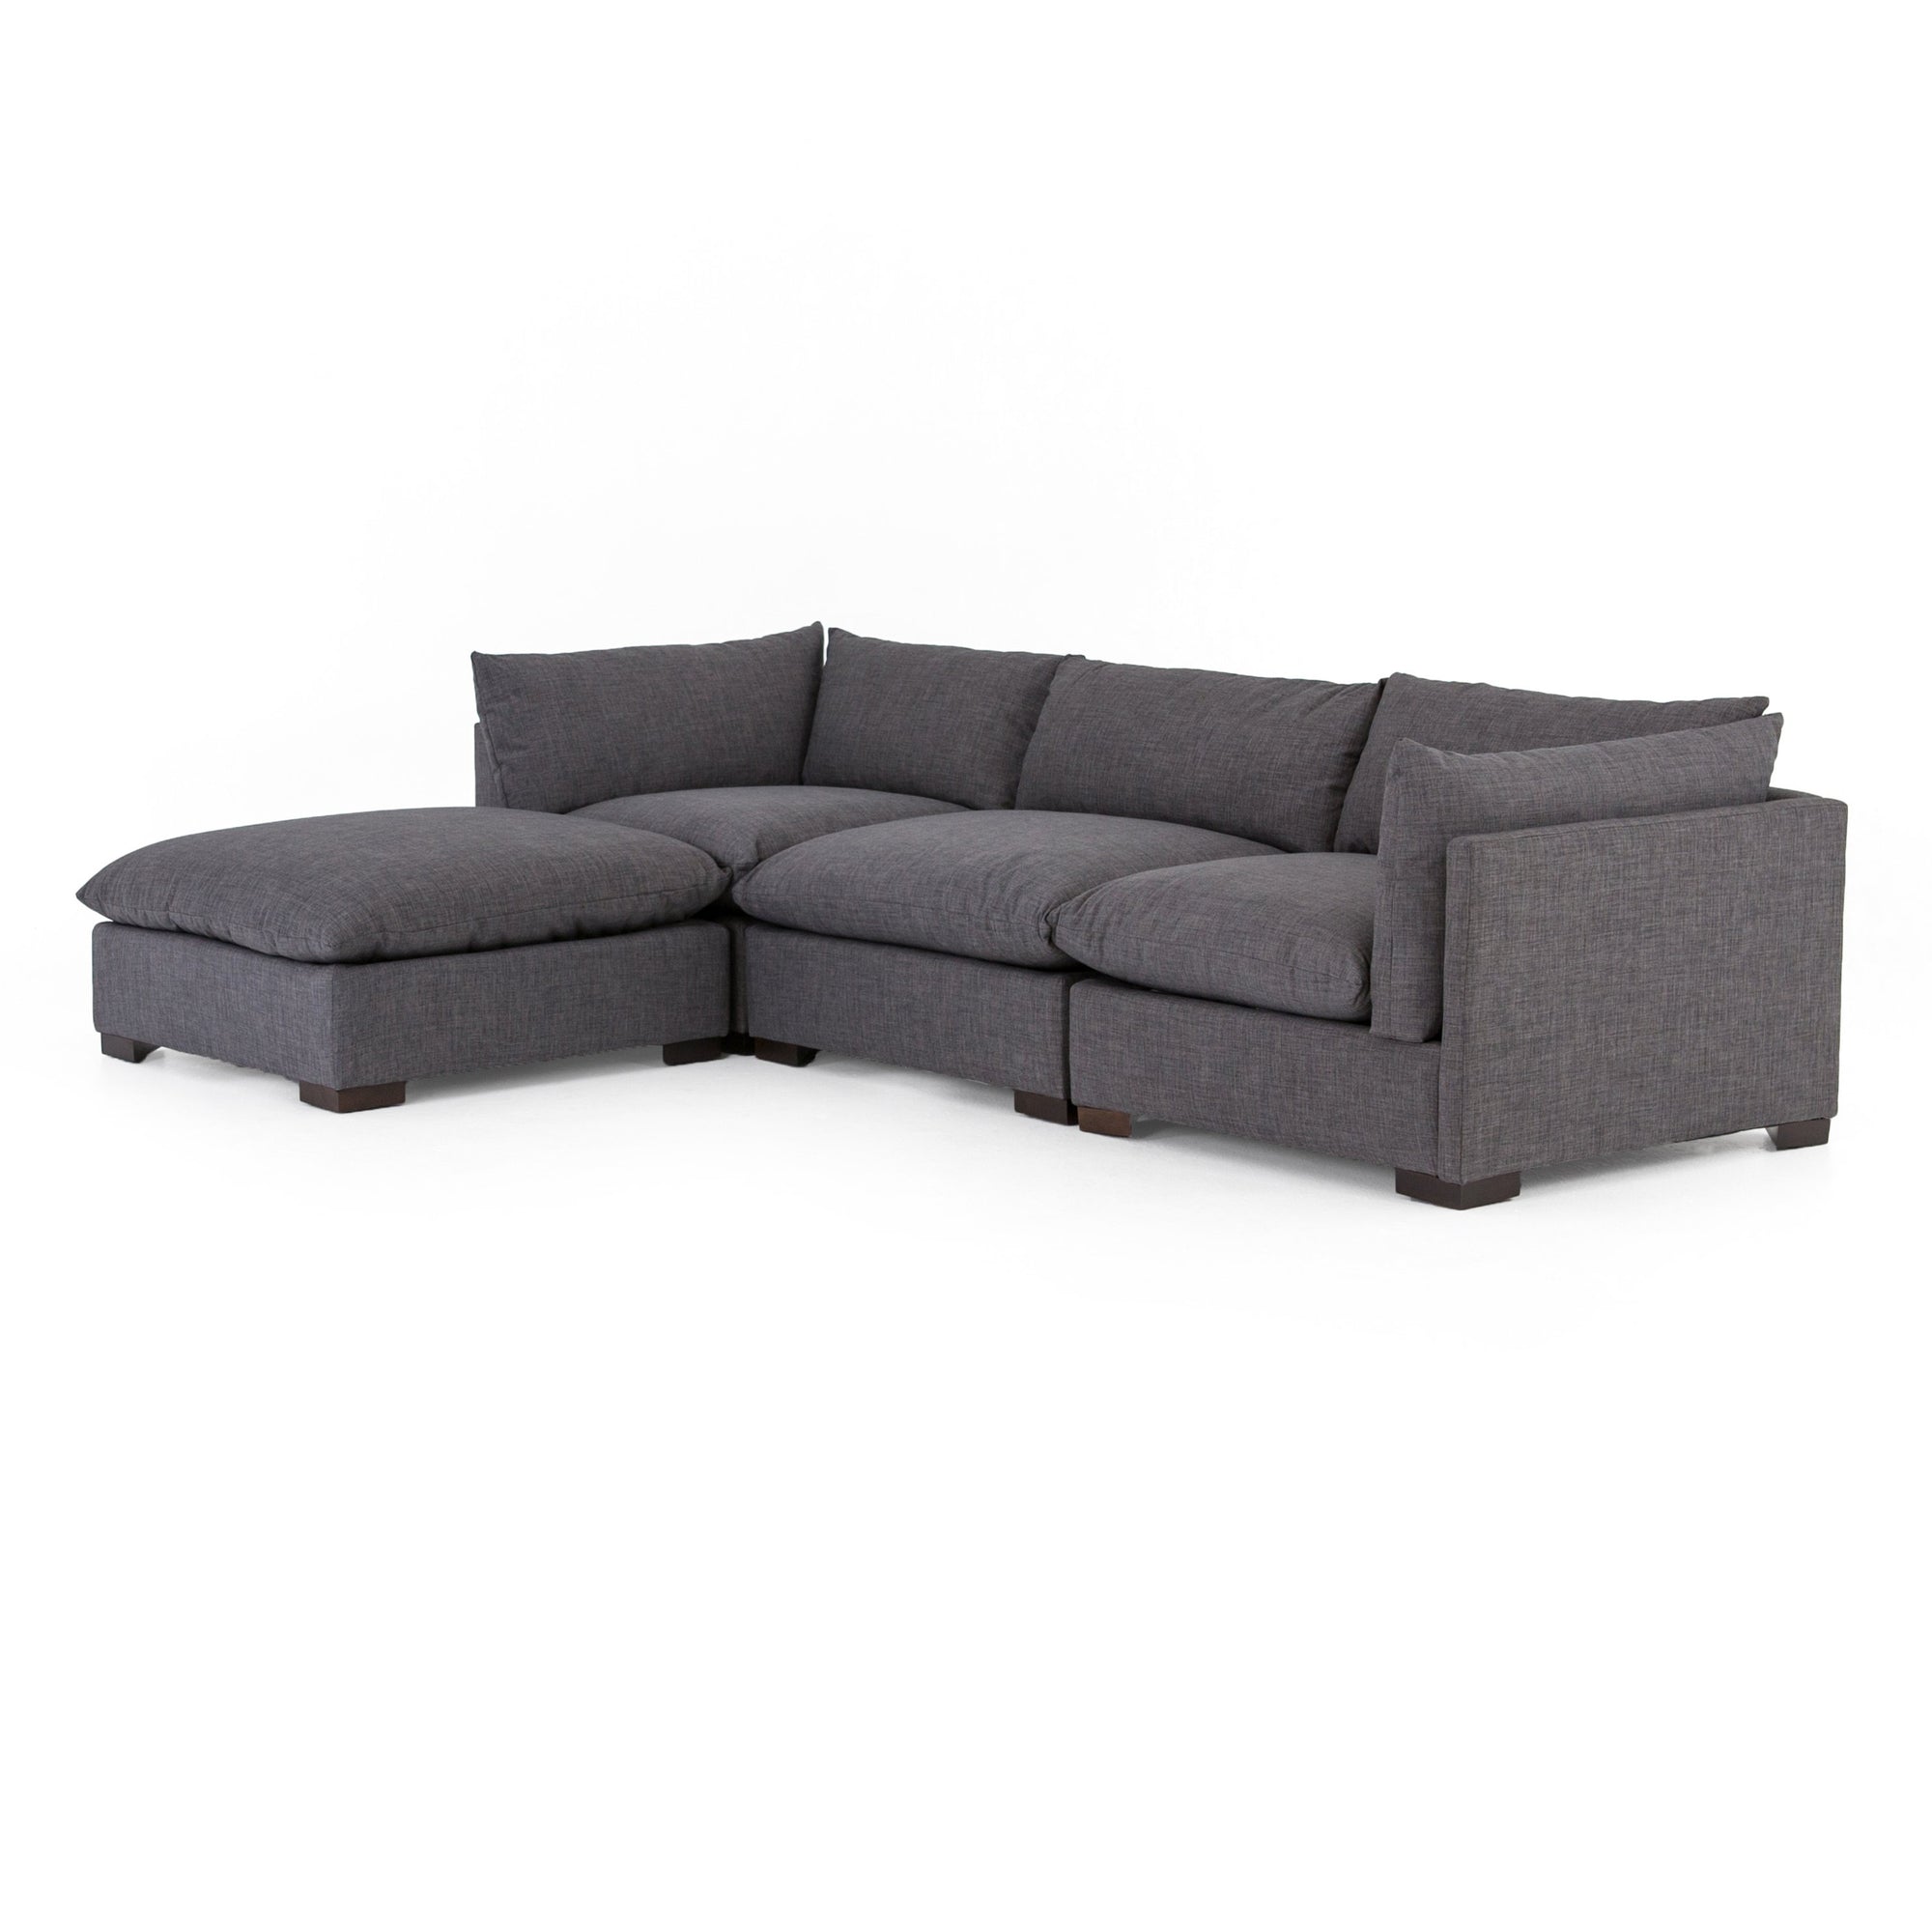 Westwood 3 - Pc Sectional W/ Ottoman - Bc